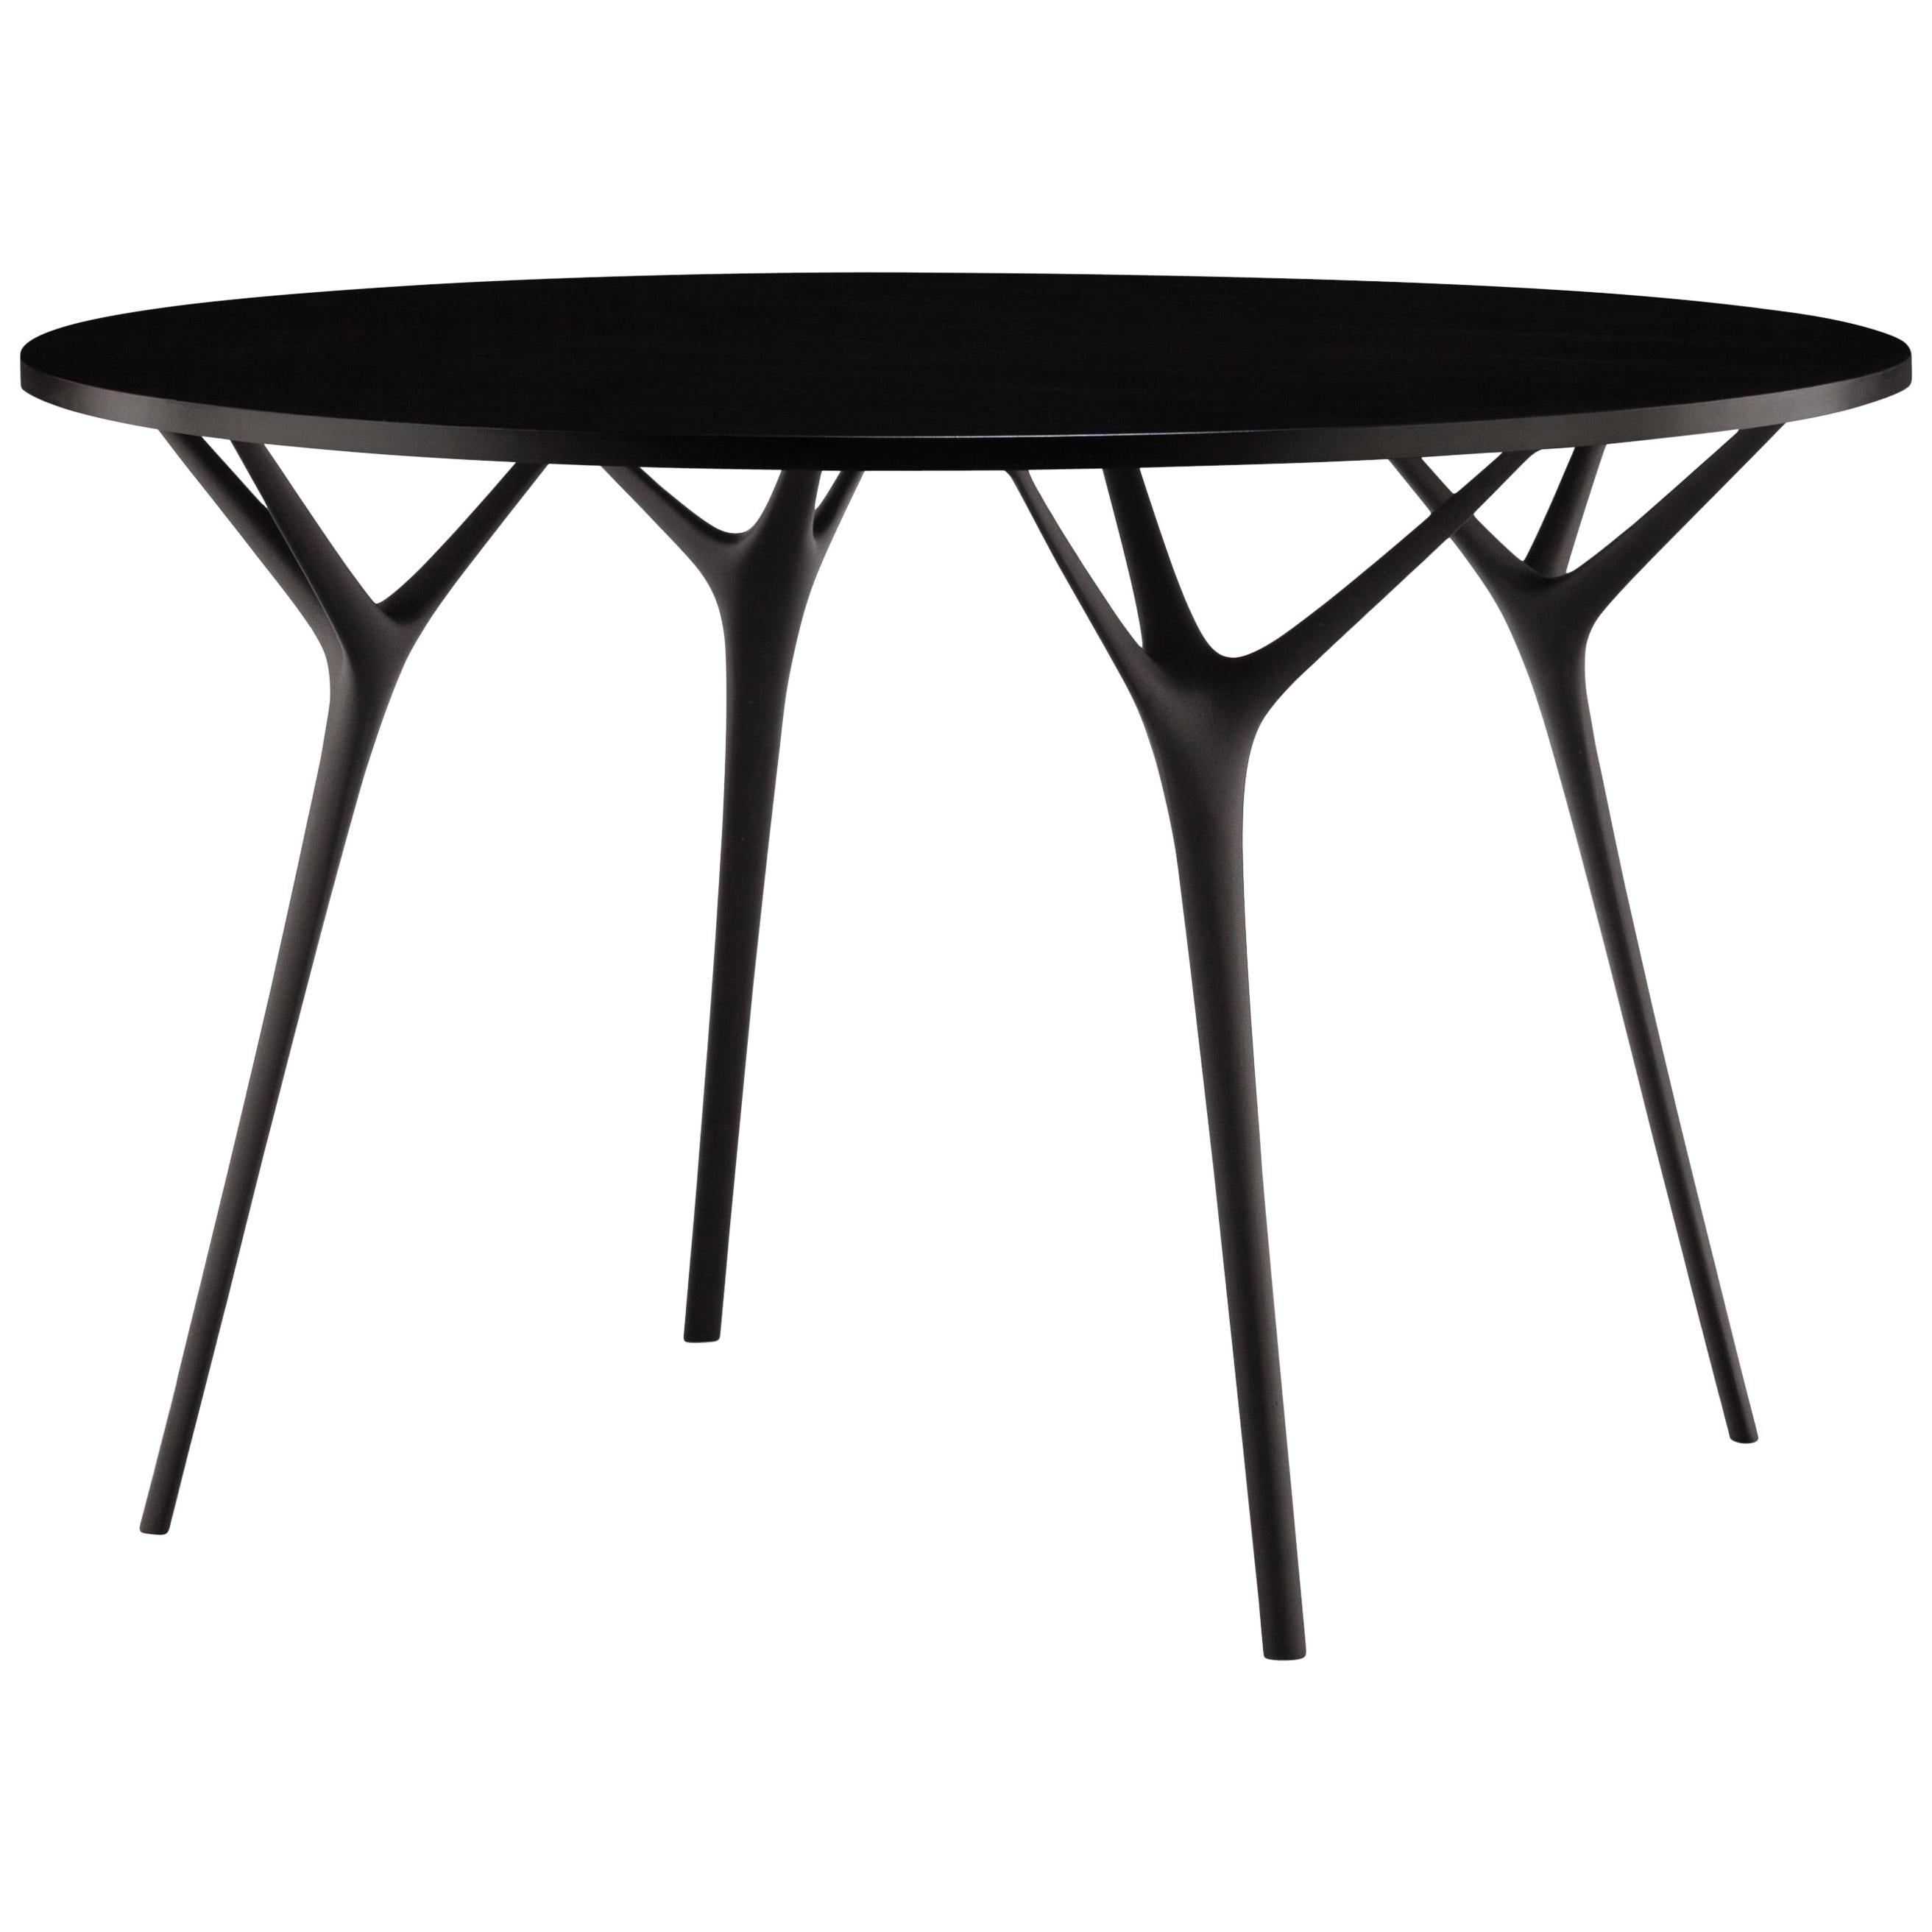 Stellarnova, Recycled Cast Aluminum Legs & Bamboo Dining Table by Made in Ratio